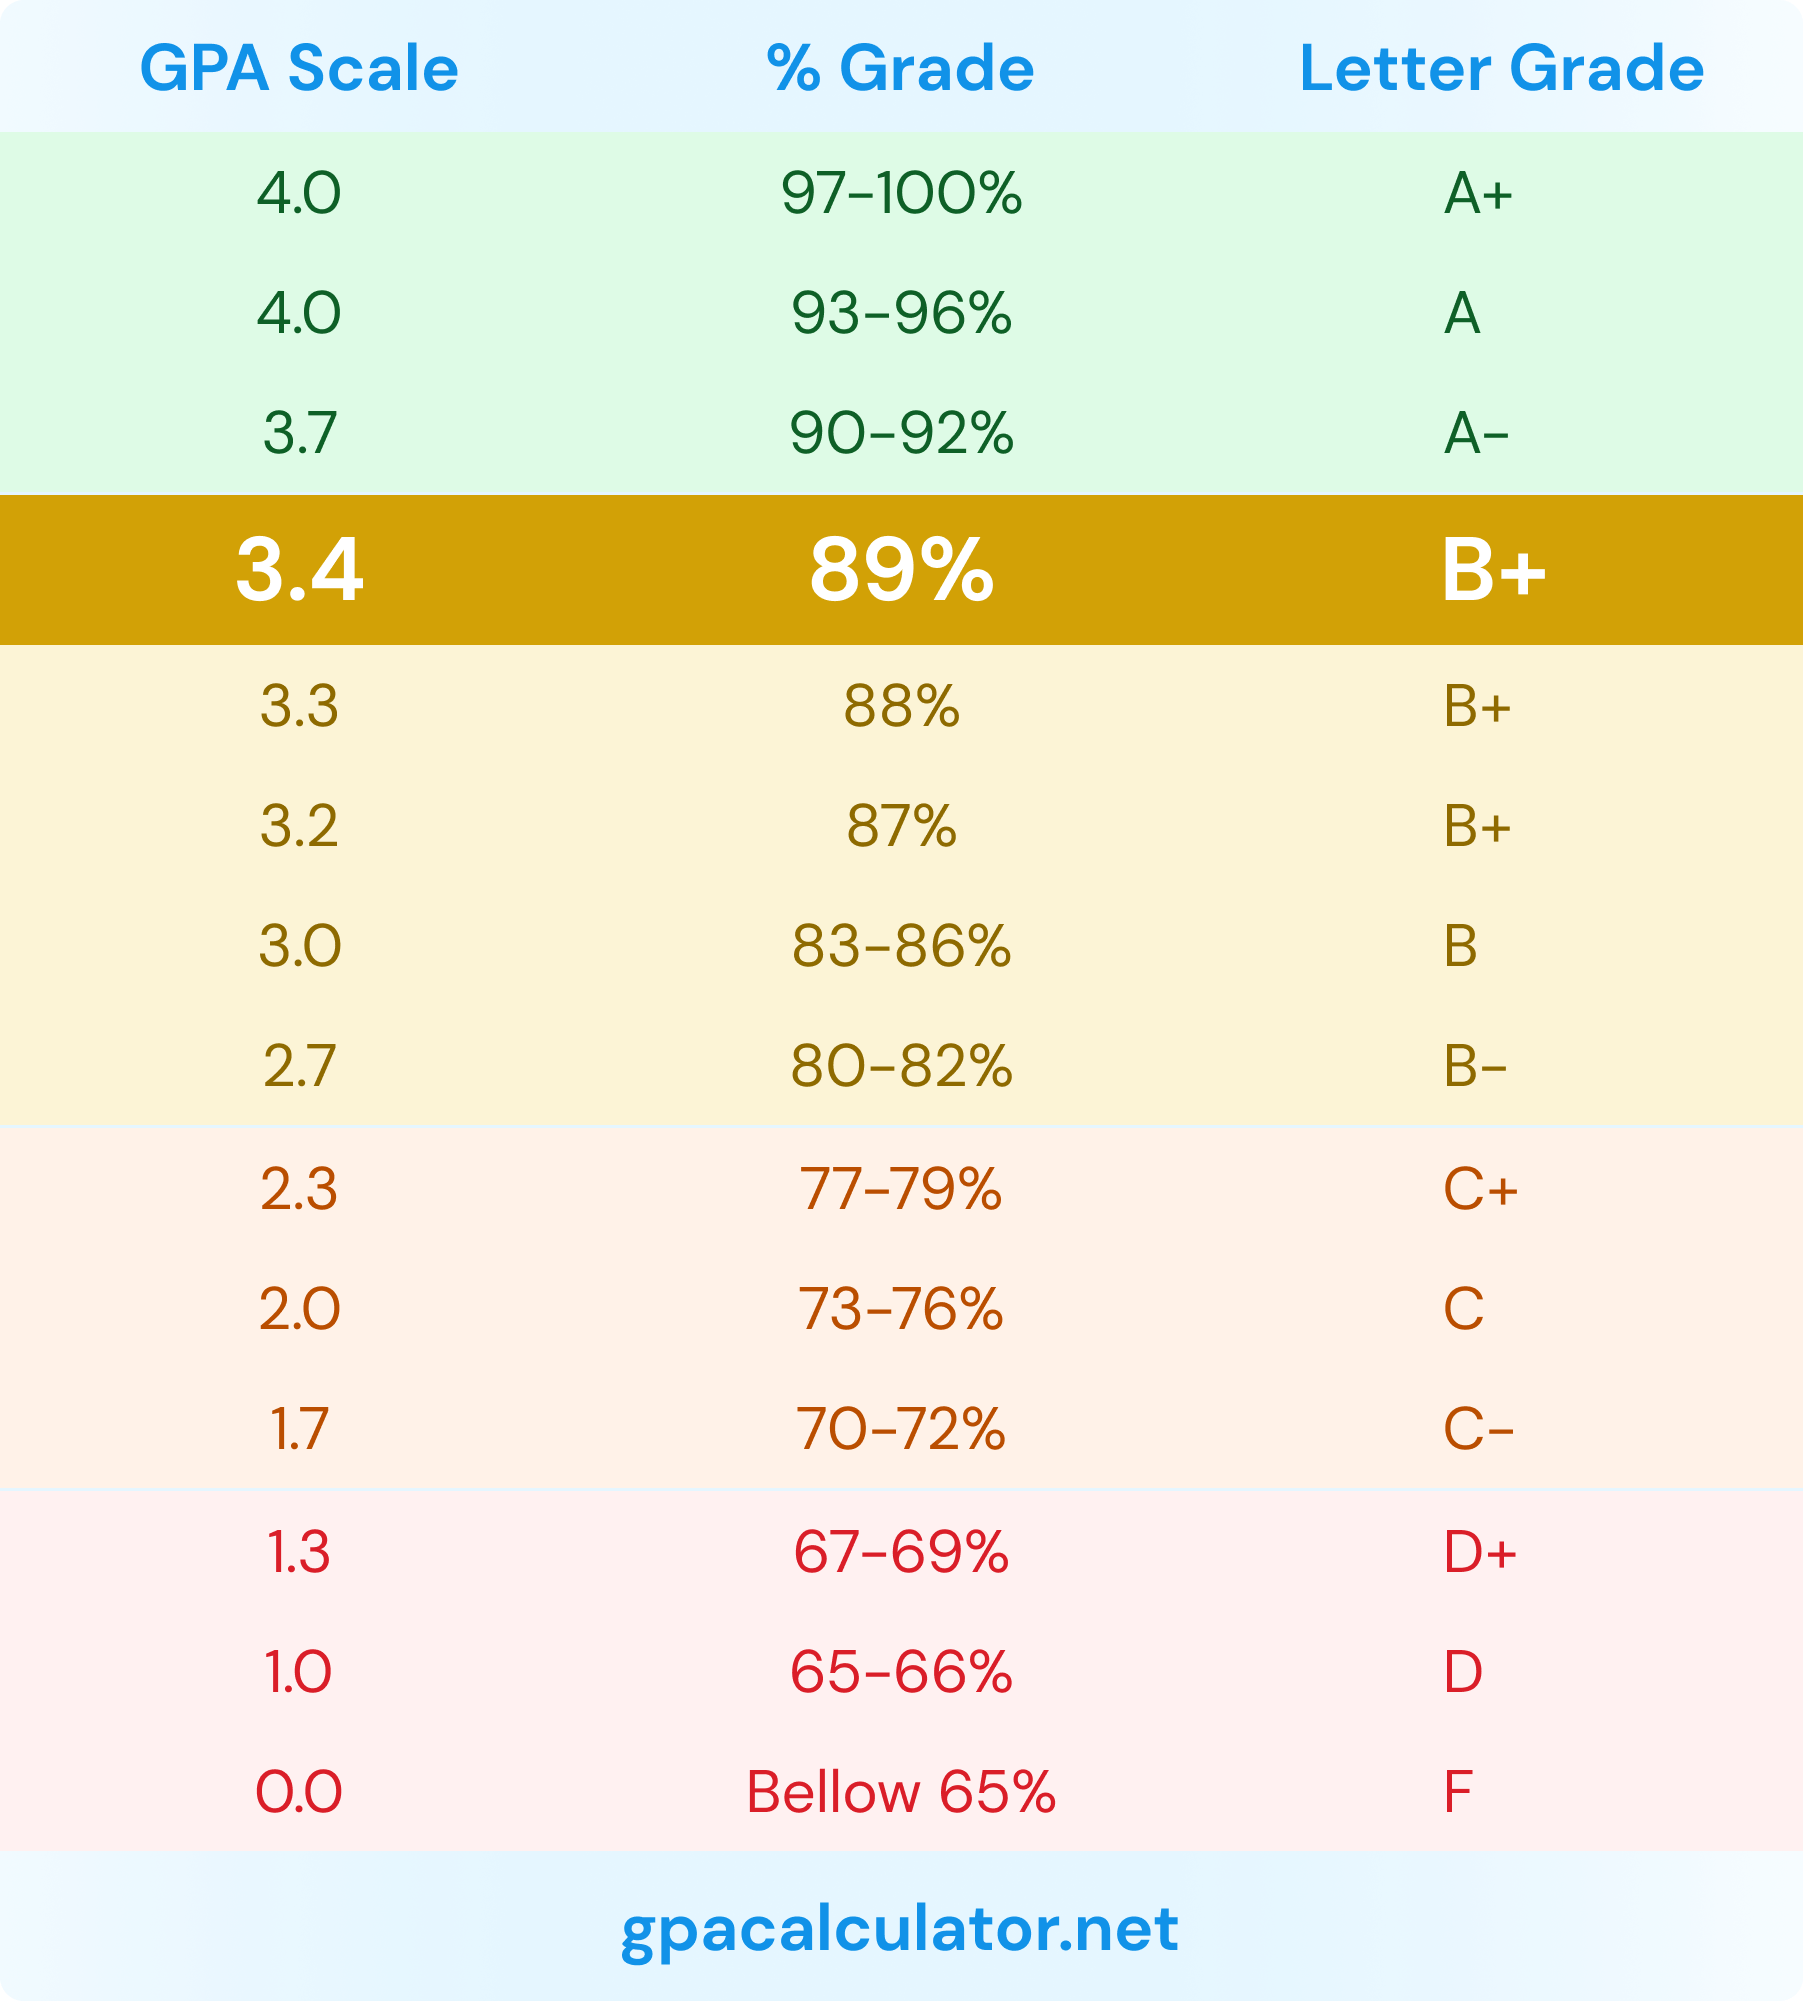 3.4 GPA is equivalent to 89 or a B+ letter grade.